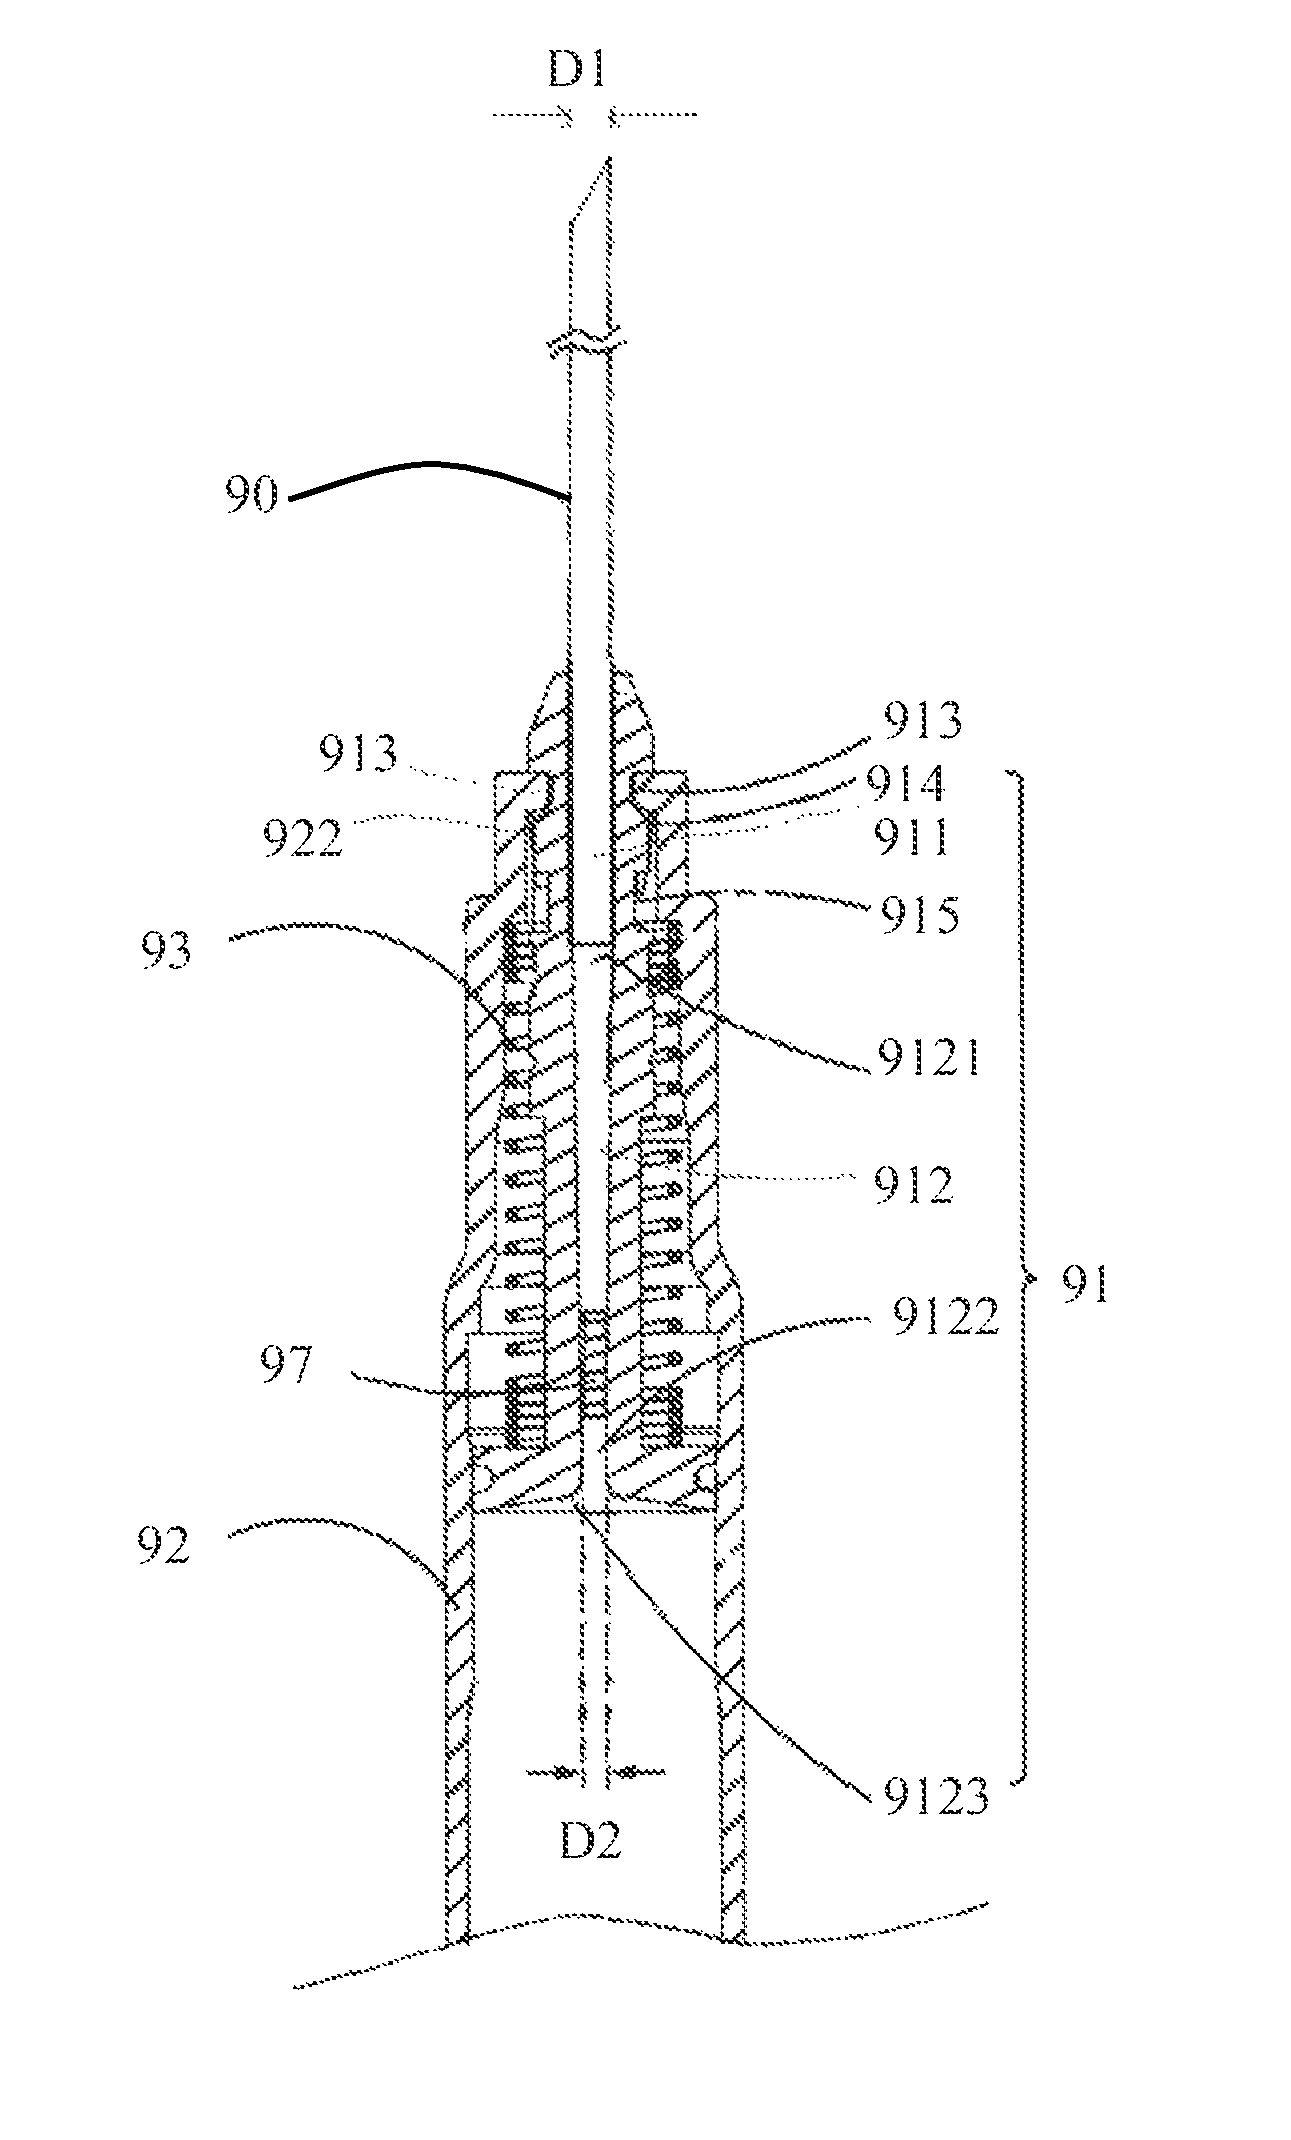 Automatically retractable safety injector for non-liquid material